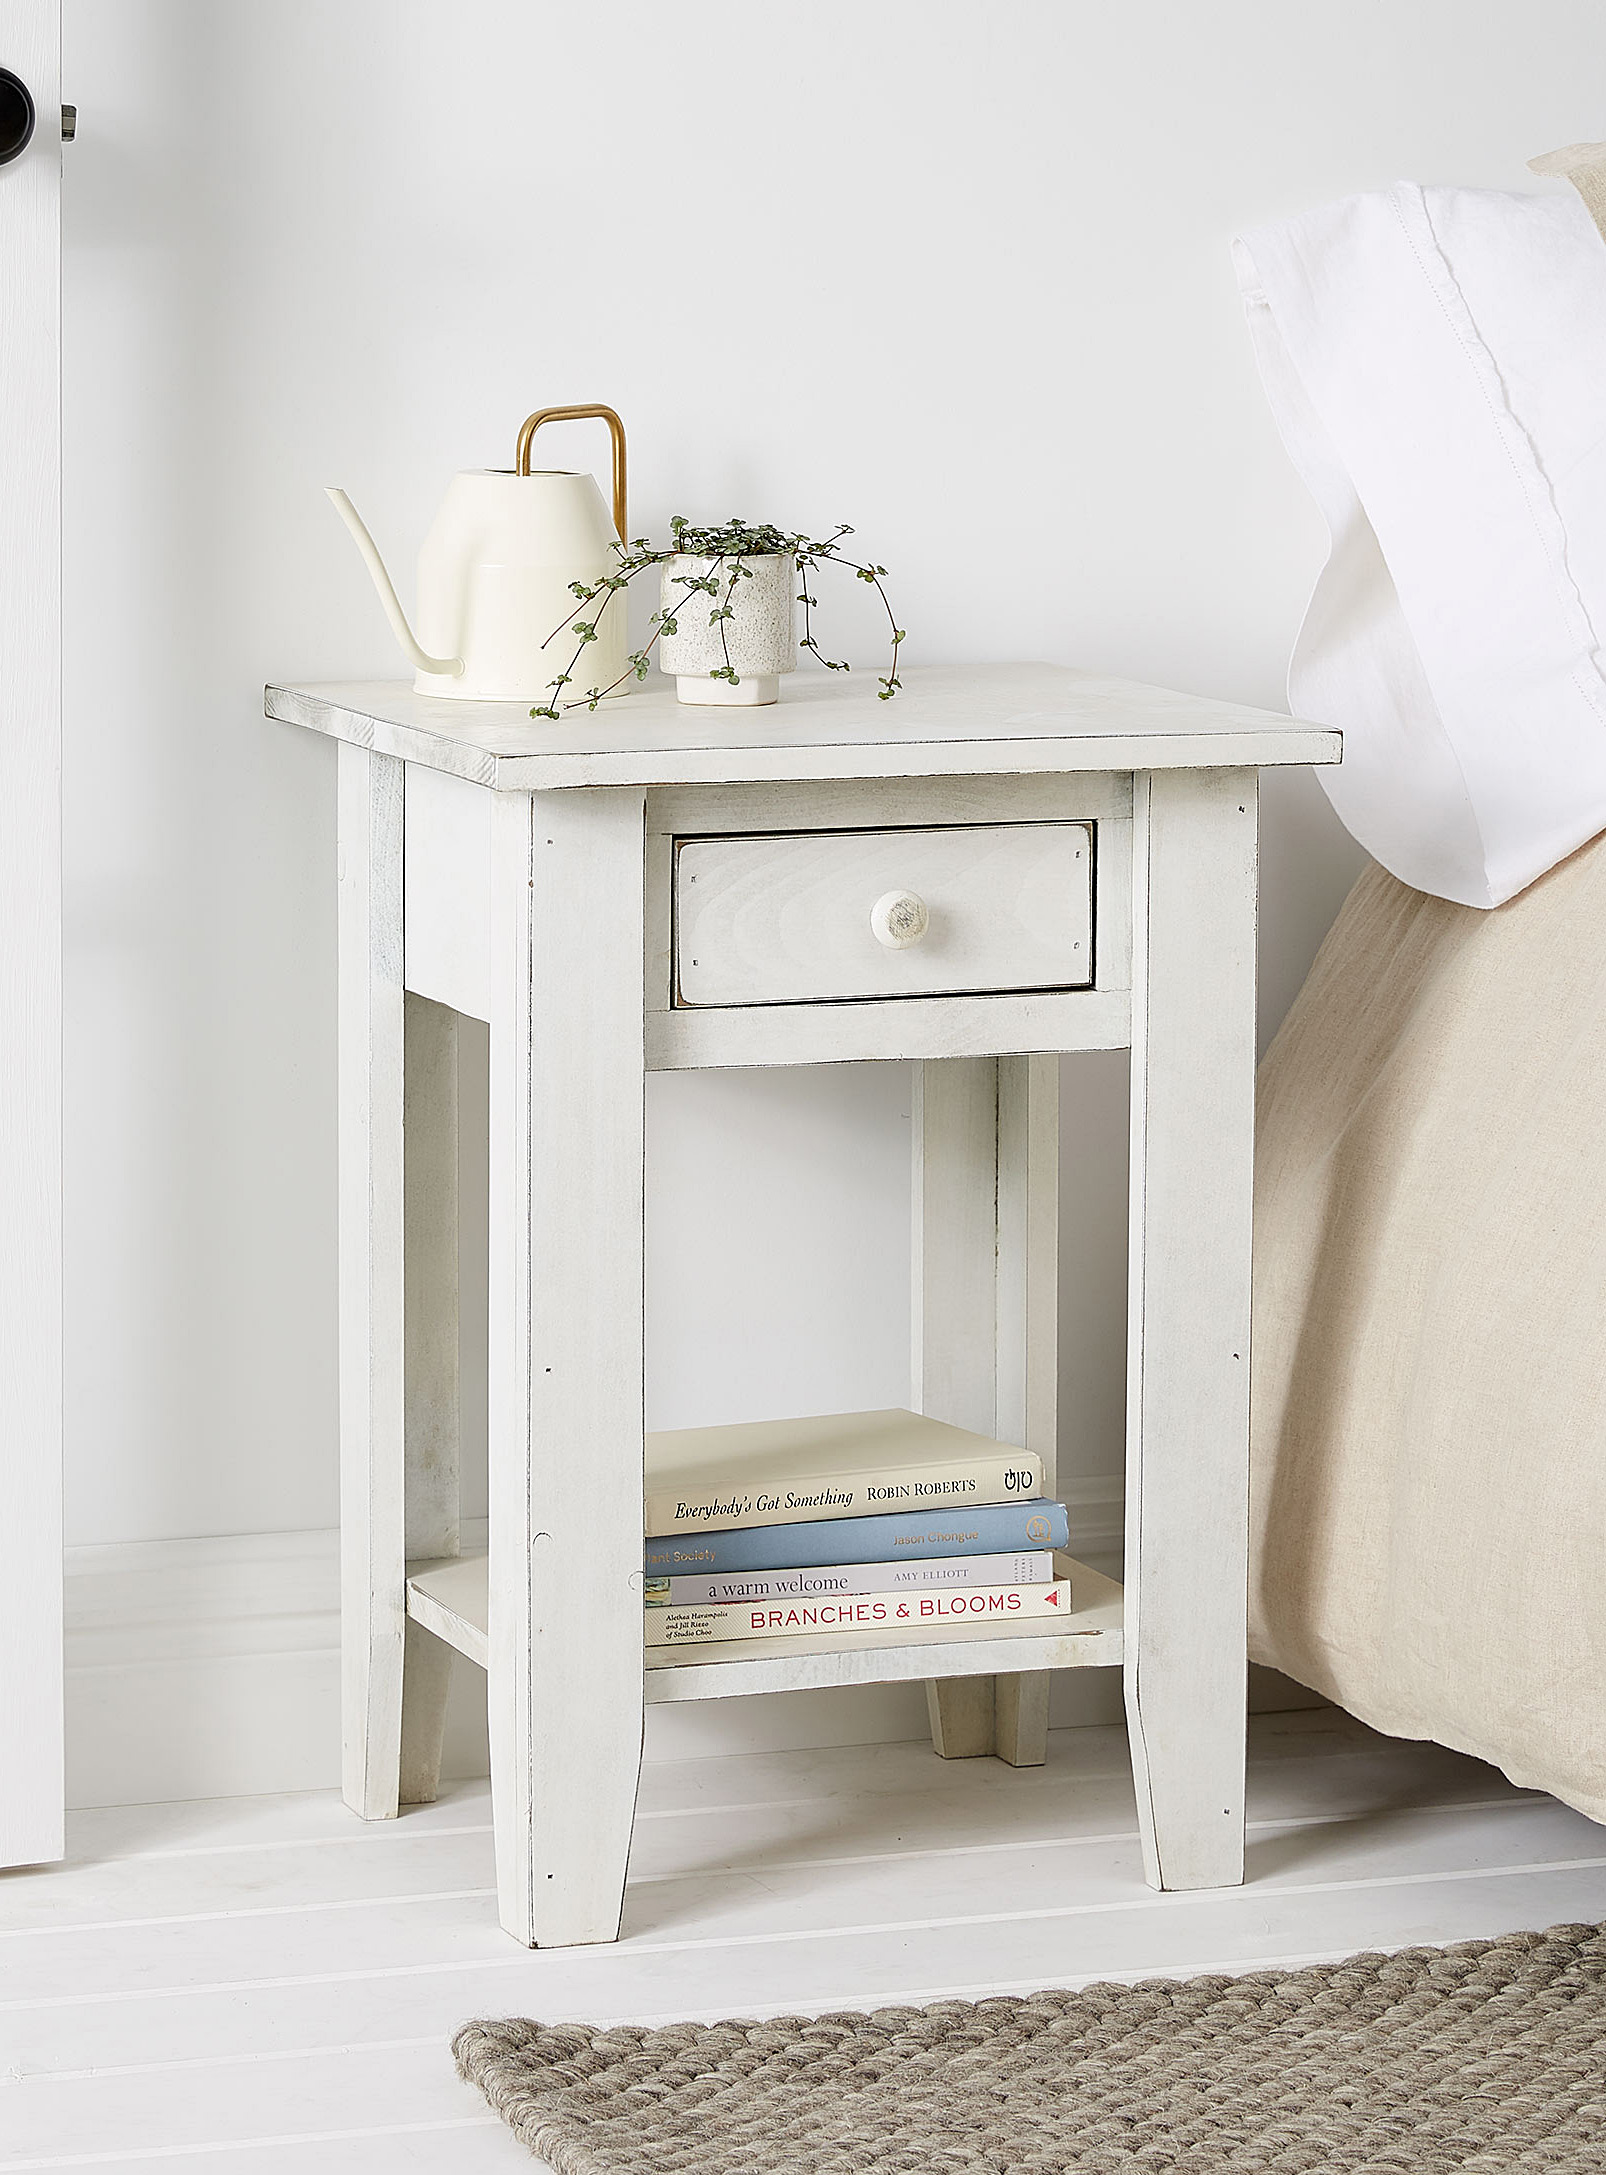 Springwater Woodcraft - Vintage white small accent table